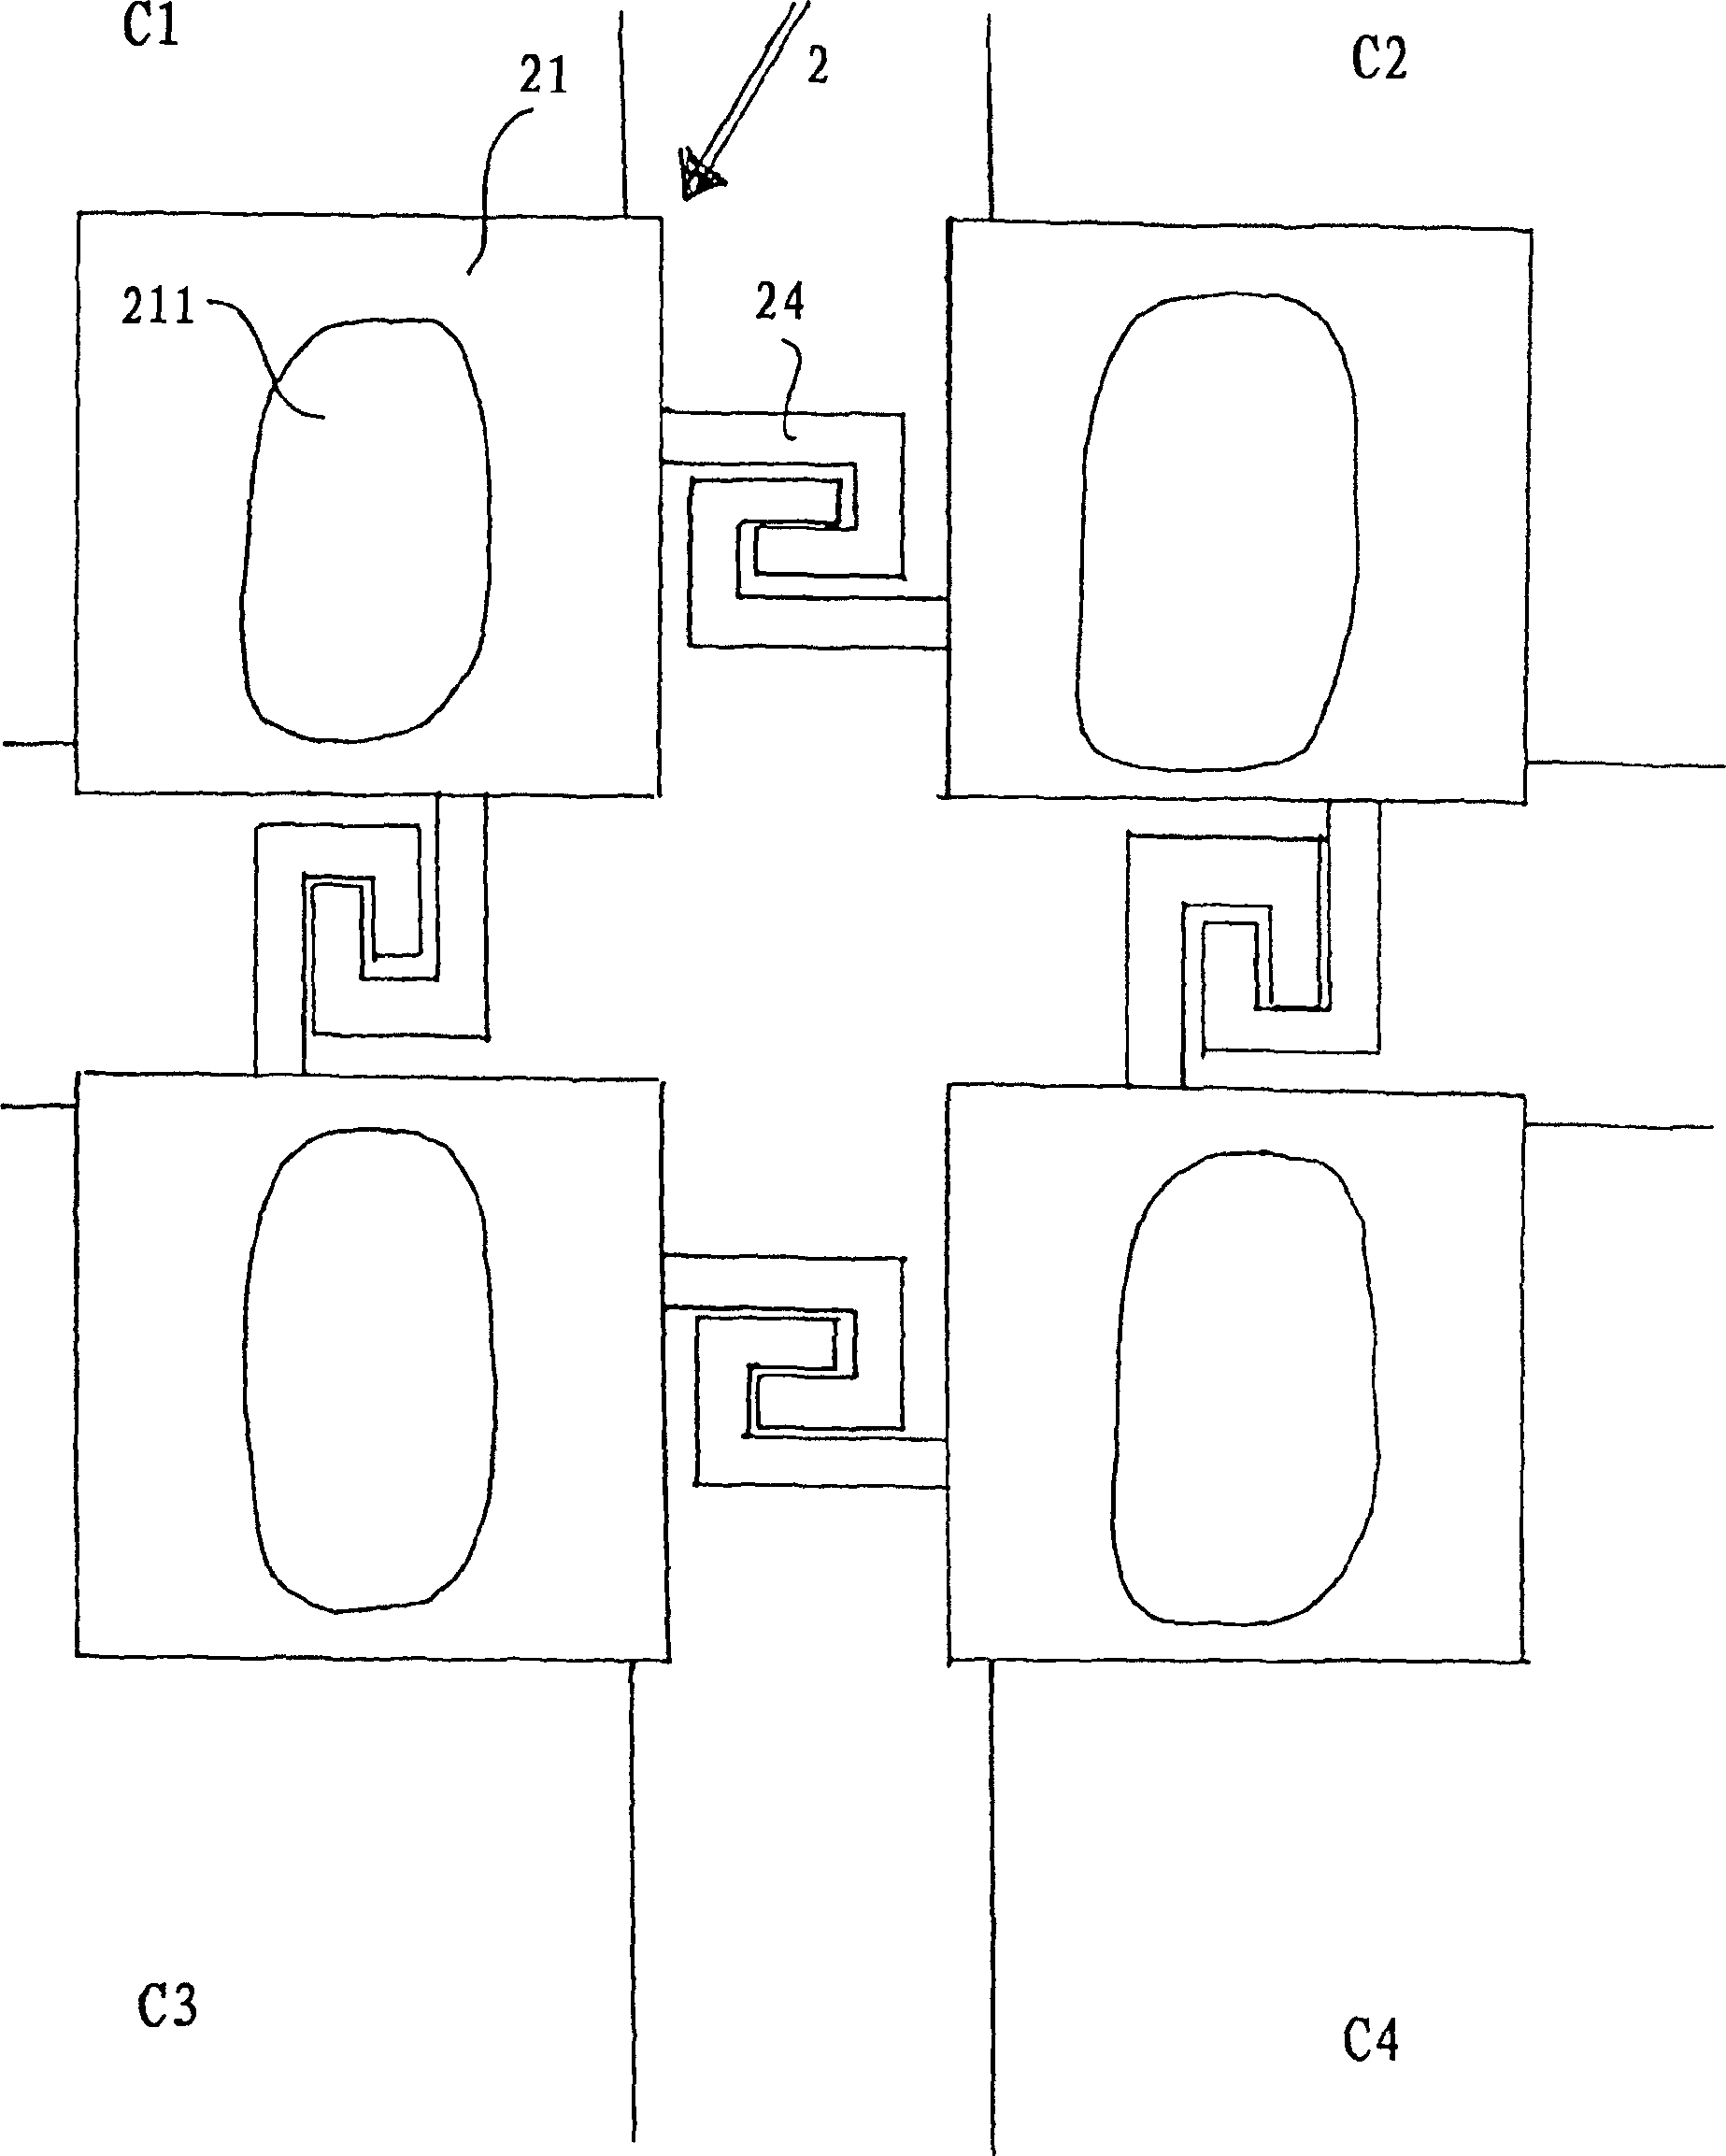 Self-locking, self-adjusting receptacles, particularly containers